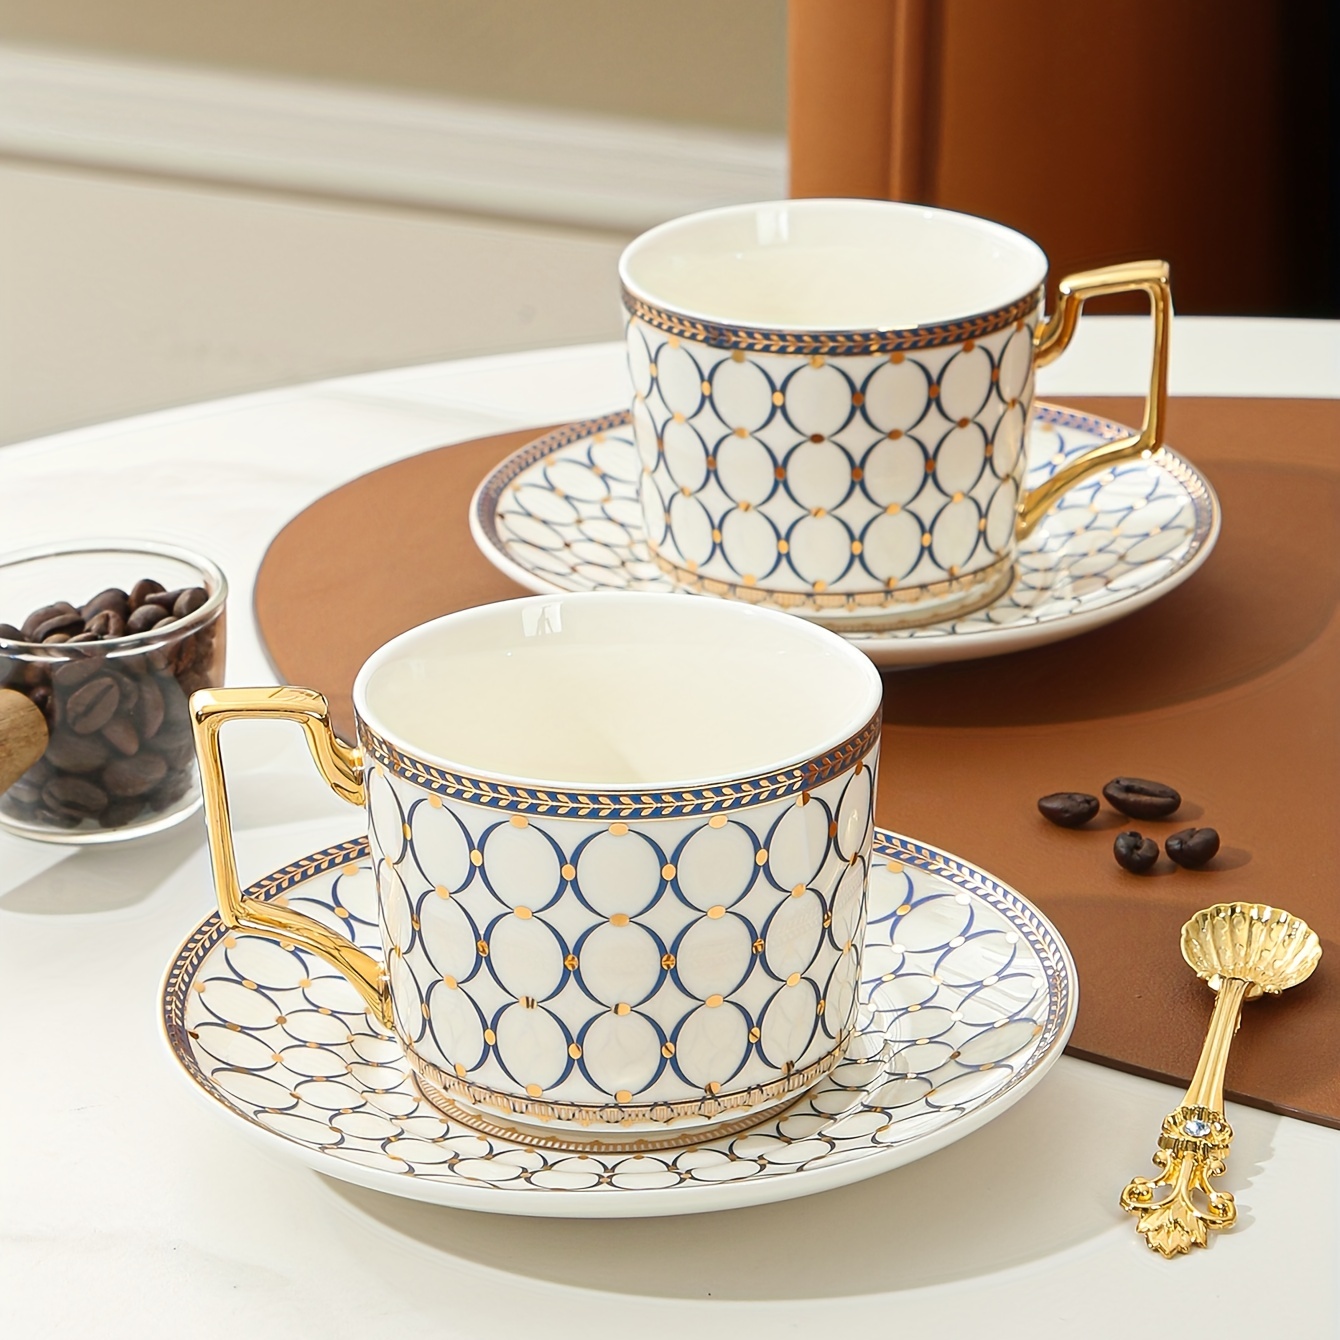 Turkish Coffee Cup Set - Turkish Coffee Cups Set of 6 with Saucers and Cup  Holder for Home Office, Ceramic Keeps Coffee Warm, Dishwasher-safe, Create